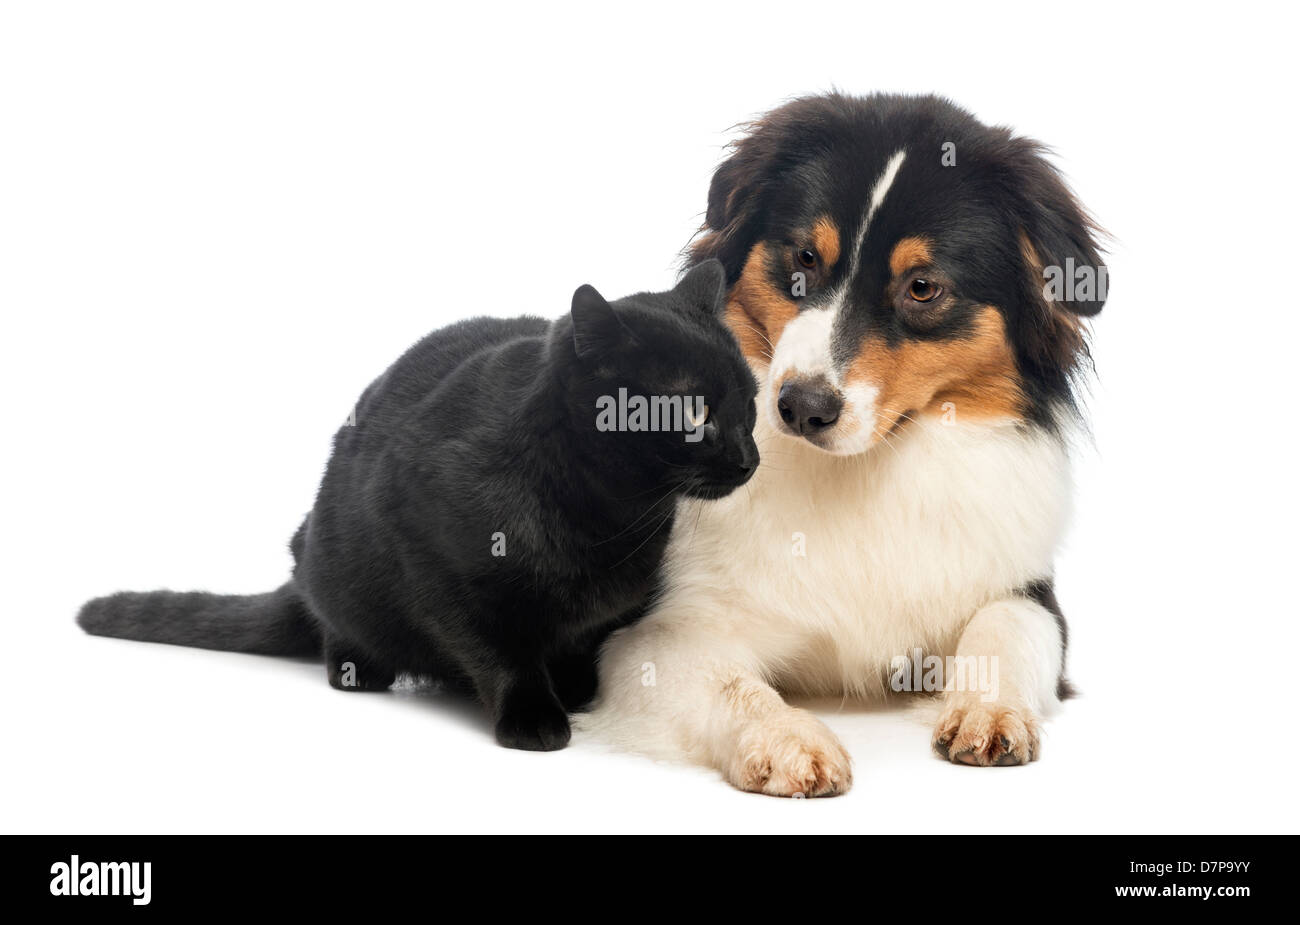 Australian Shepherd lying and looking at a Black Cat in front of white background Stock Photo